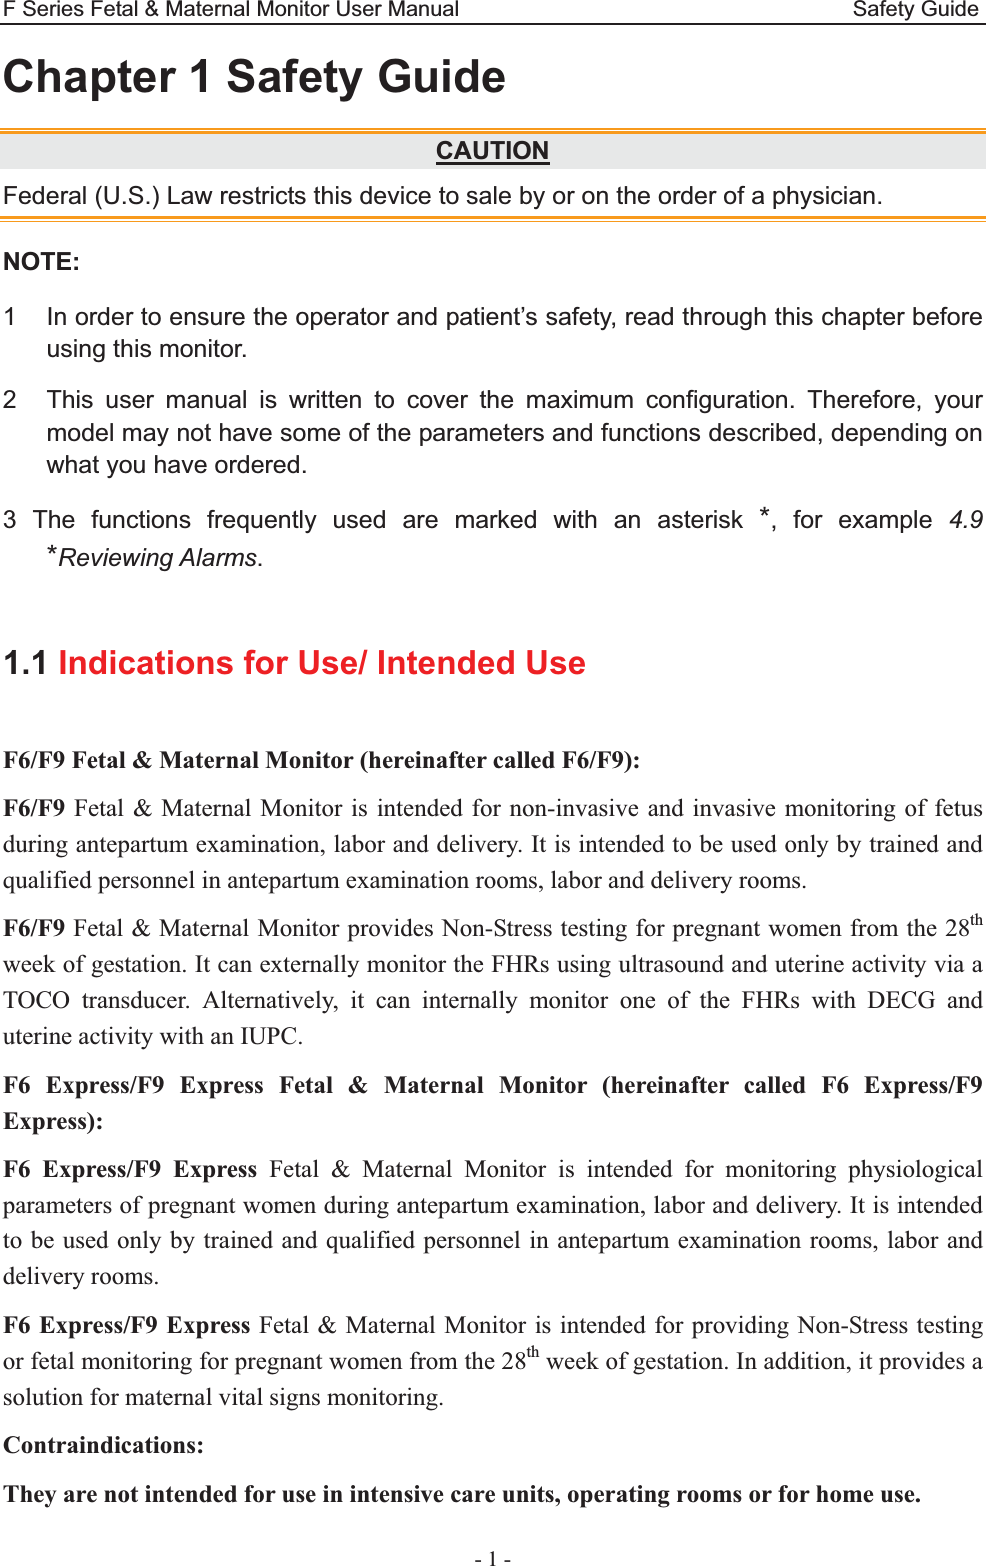 F Series Fetal &amp; Maternal Monitor User Manual                                    Safety Guide - 1 - Chapter 1 Safety Guide CAUTIONFederal (U.S.) Law restricts this device to sale by or on the order of a physician. NOTE: 1  In order to ensure the operator and patient’s safety, read through this chapter before using this monitor. 2  This user manual is written to cover the maximum configuration. Therefore, your model may not have some of the parameters and functions described, depending on what you have ordered.   3 The functions frequently used are marked with an asterisk *, for example 4.9 *Reviewing Alarms.  1.1 Indications for Use/ Intended Use F6/F9 Fetal &amp; Maternal Monitor (hereinafter called F6/F9): F6/F9 Fetal &amp; Maternal Monitor is intended for non-invasive and invasive monitoring of fetus during antepartum examination, labor and delivery. It is intended to be used only by trained and qualified personnel in antepartum examination rooms, labor and delivery rooms. F6/F9 Fetal &amp; Maternal Monitor provides Non-Stress testing for pregnant women from the 28th week of gestation. It can externally monitor the FHRs using ultrasound and uterine activity via a TOCO transducer. Alternatively, it can internally monitor one of the FHRs with DECG and uterine activity with an IUPC. F6 Express/F9 Express Fetal &amp; Maternal Monitor (hereinafter called F6 Express/F9 Express): F6 Express/F9 Express Fetal &amp; Maternal Monitor is intended for monitoring physiological parameters of pregnant women during antepartum examination, labor and delivery. It is intended to be used only by trained and qualified personnel in antepartum examination rooms, labor and delivery rooms. F6 Express/F9 Express Fetal &amp; Maternal Monitor is intended for providing Non-Stress testing or fetal monitoring for pregnant women from the 28th week of gestation. In addition, it provides a solution for maternal vital signs monitoring. Contraindications: They are not intended for use in intensive care units, operating rooms or for home use. 